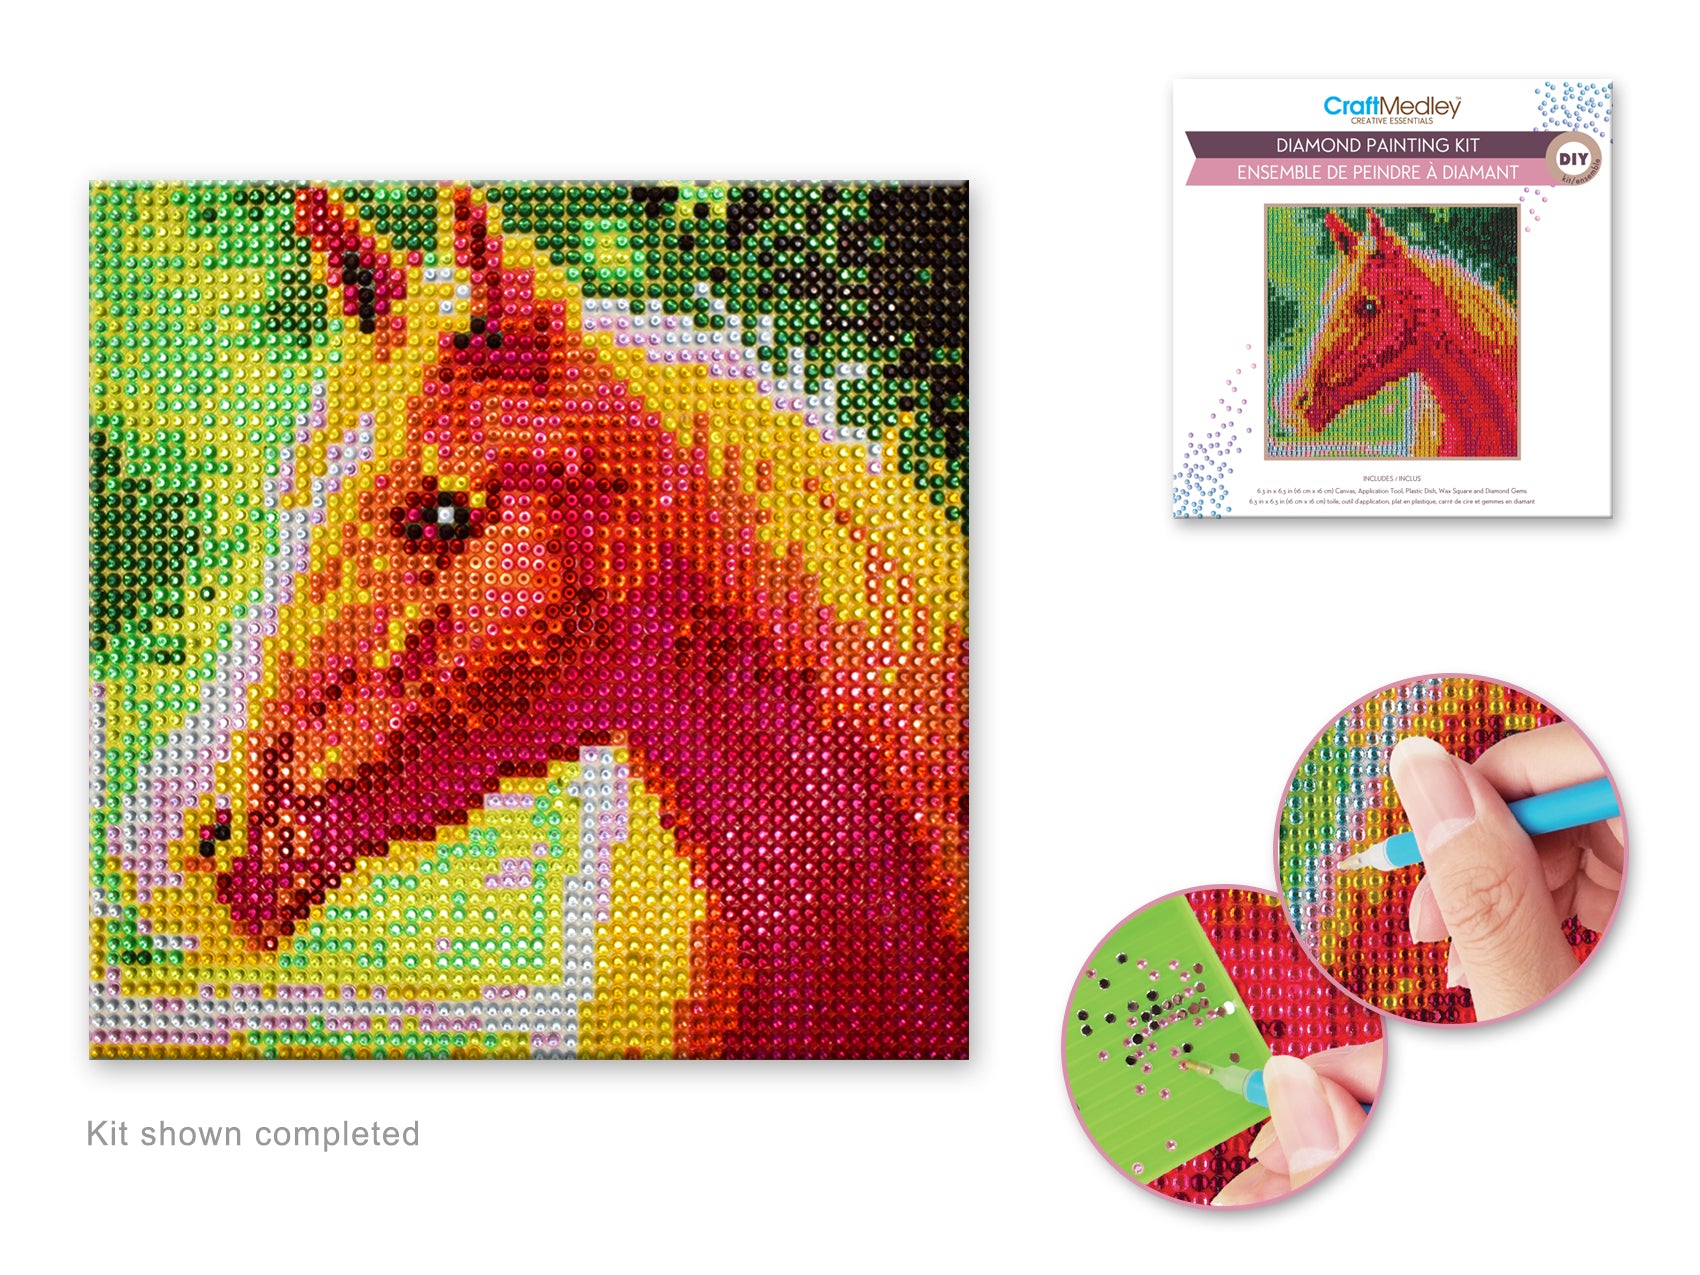 Diamond painting kit. This design features a horse head.